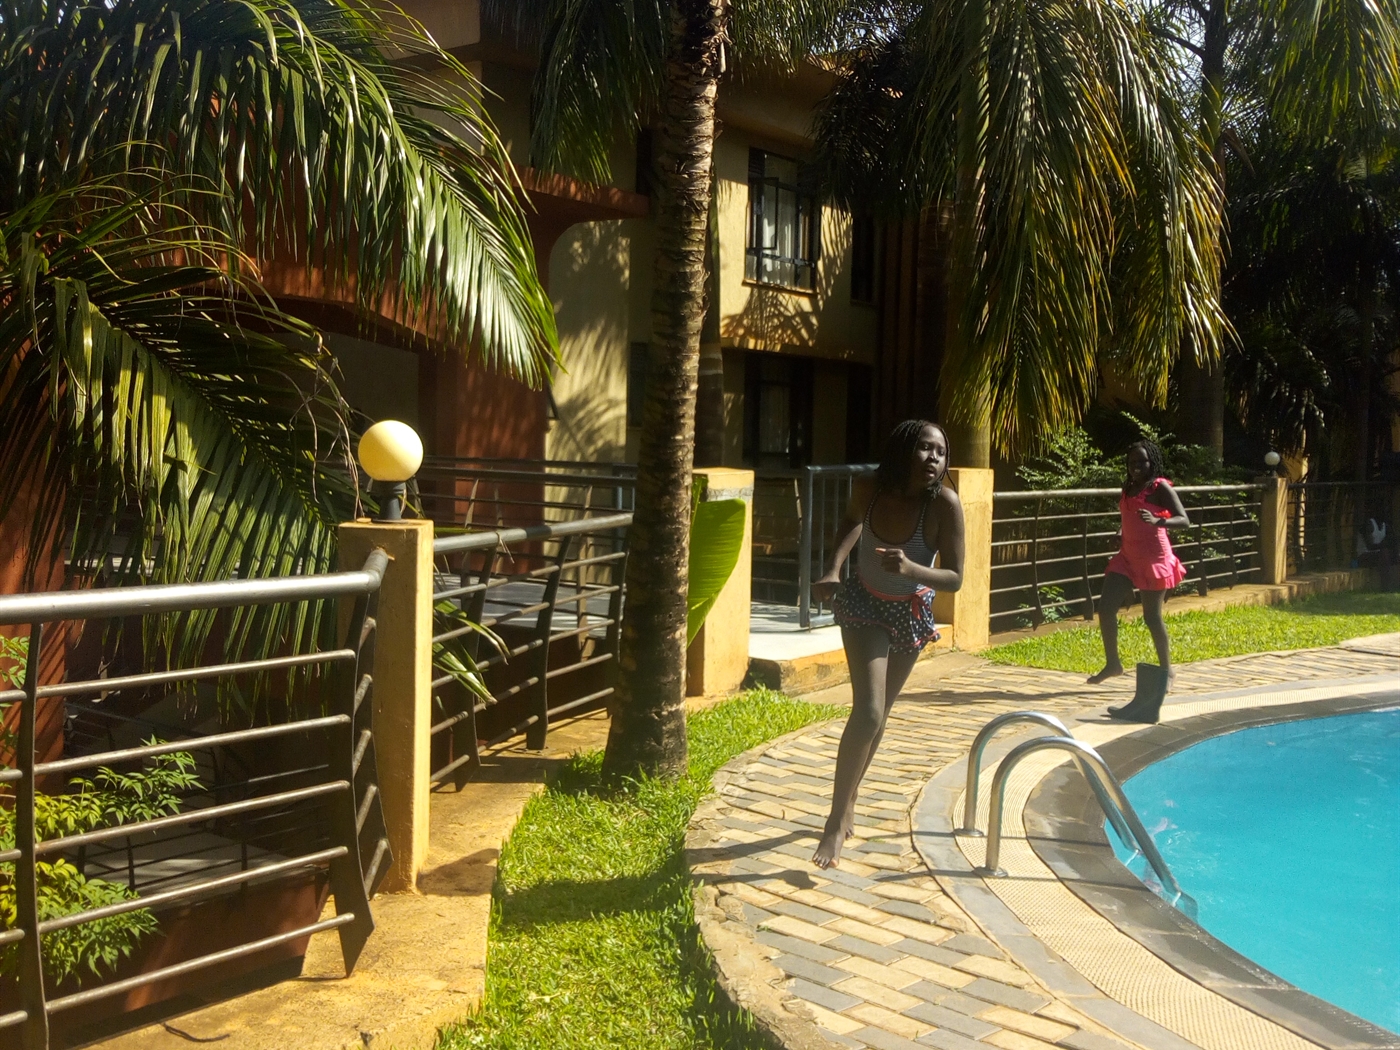 Apartment for rent in Lubowa Kampala